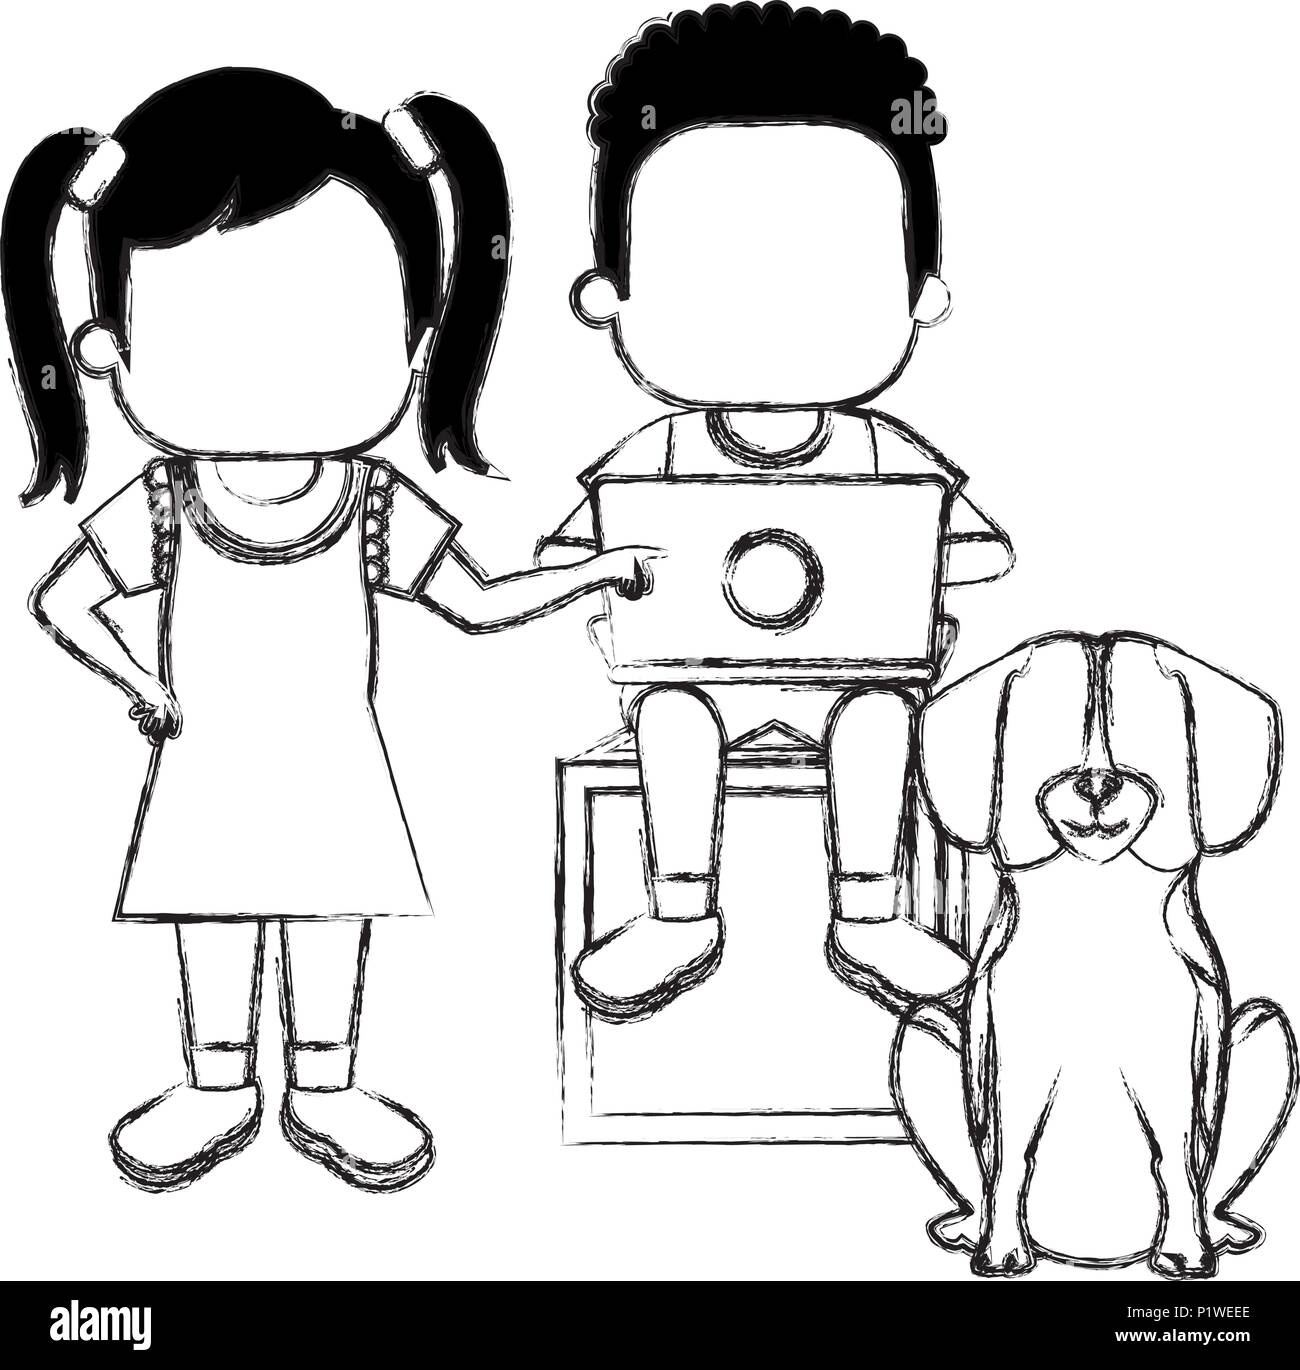 kids with laptop and cute dog Stock Vector